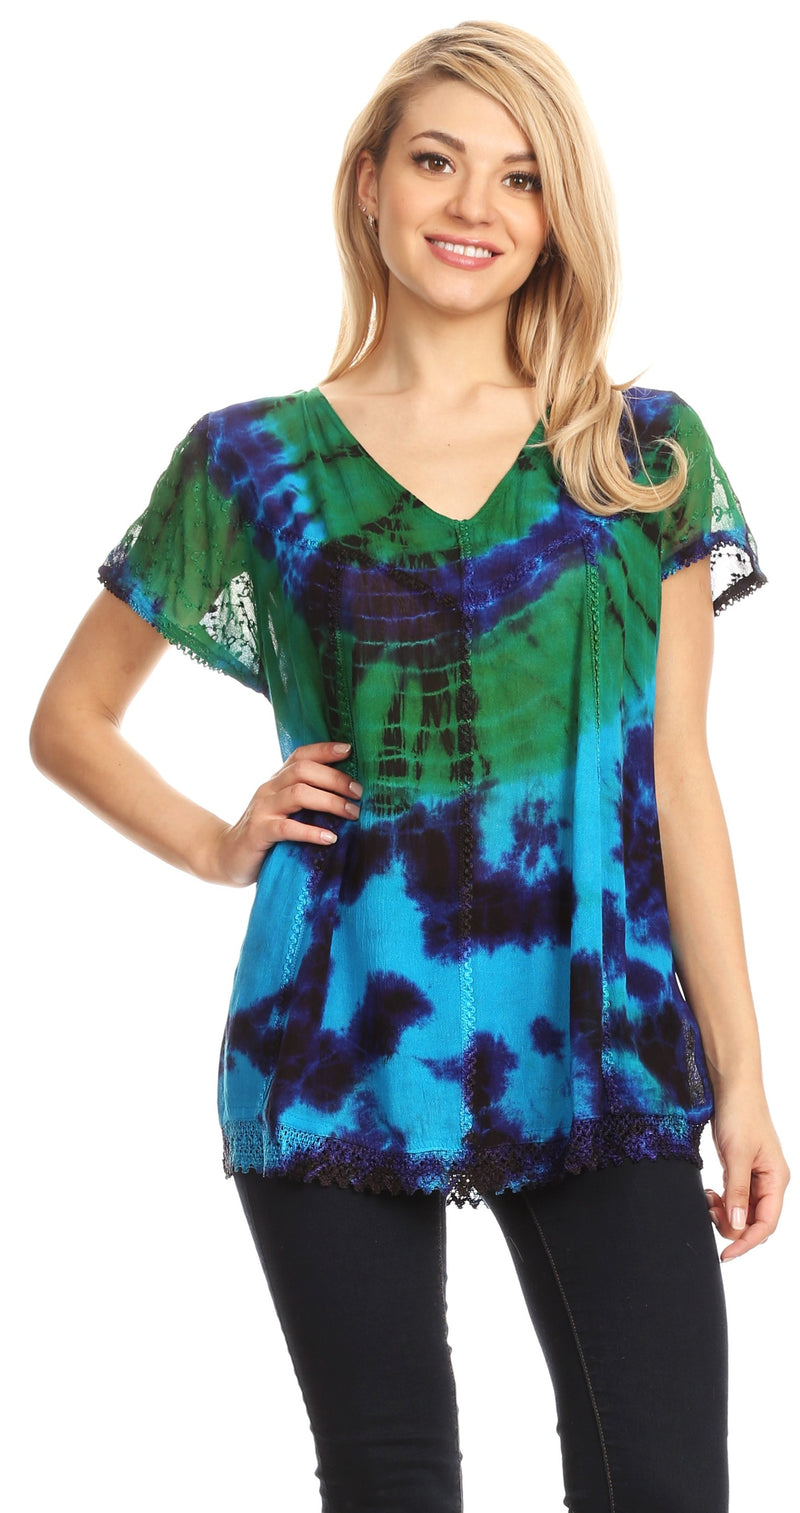 Sakkas Josea Relaxed Fit Tie Dye Embroidered Crepe Cap Sleeve Blouse | Cover Up